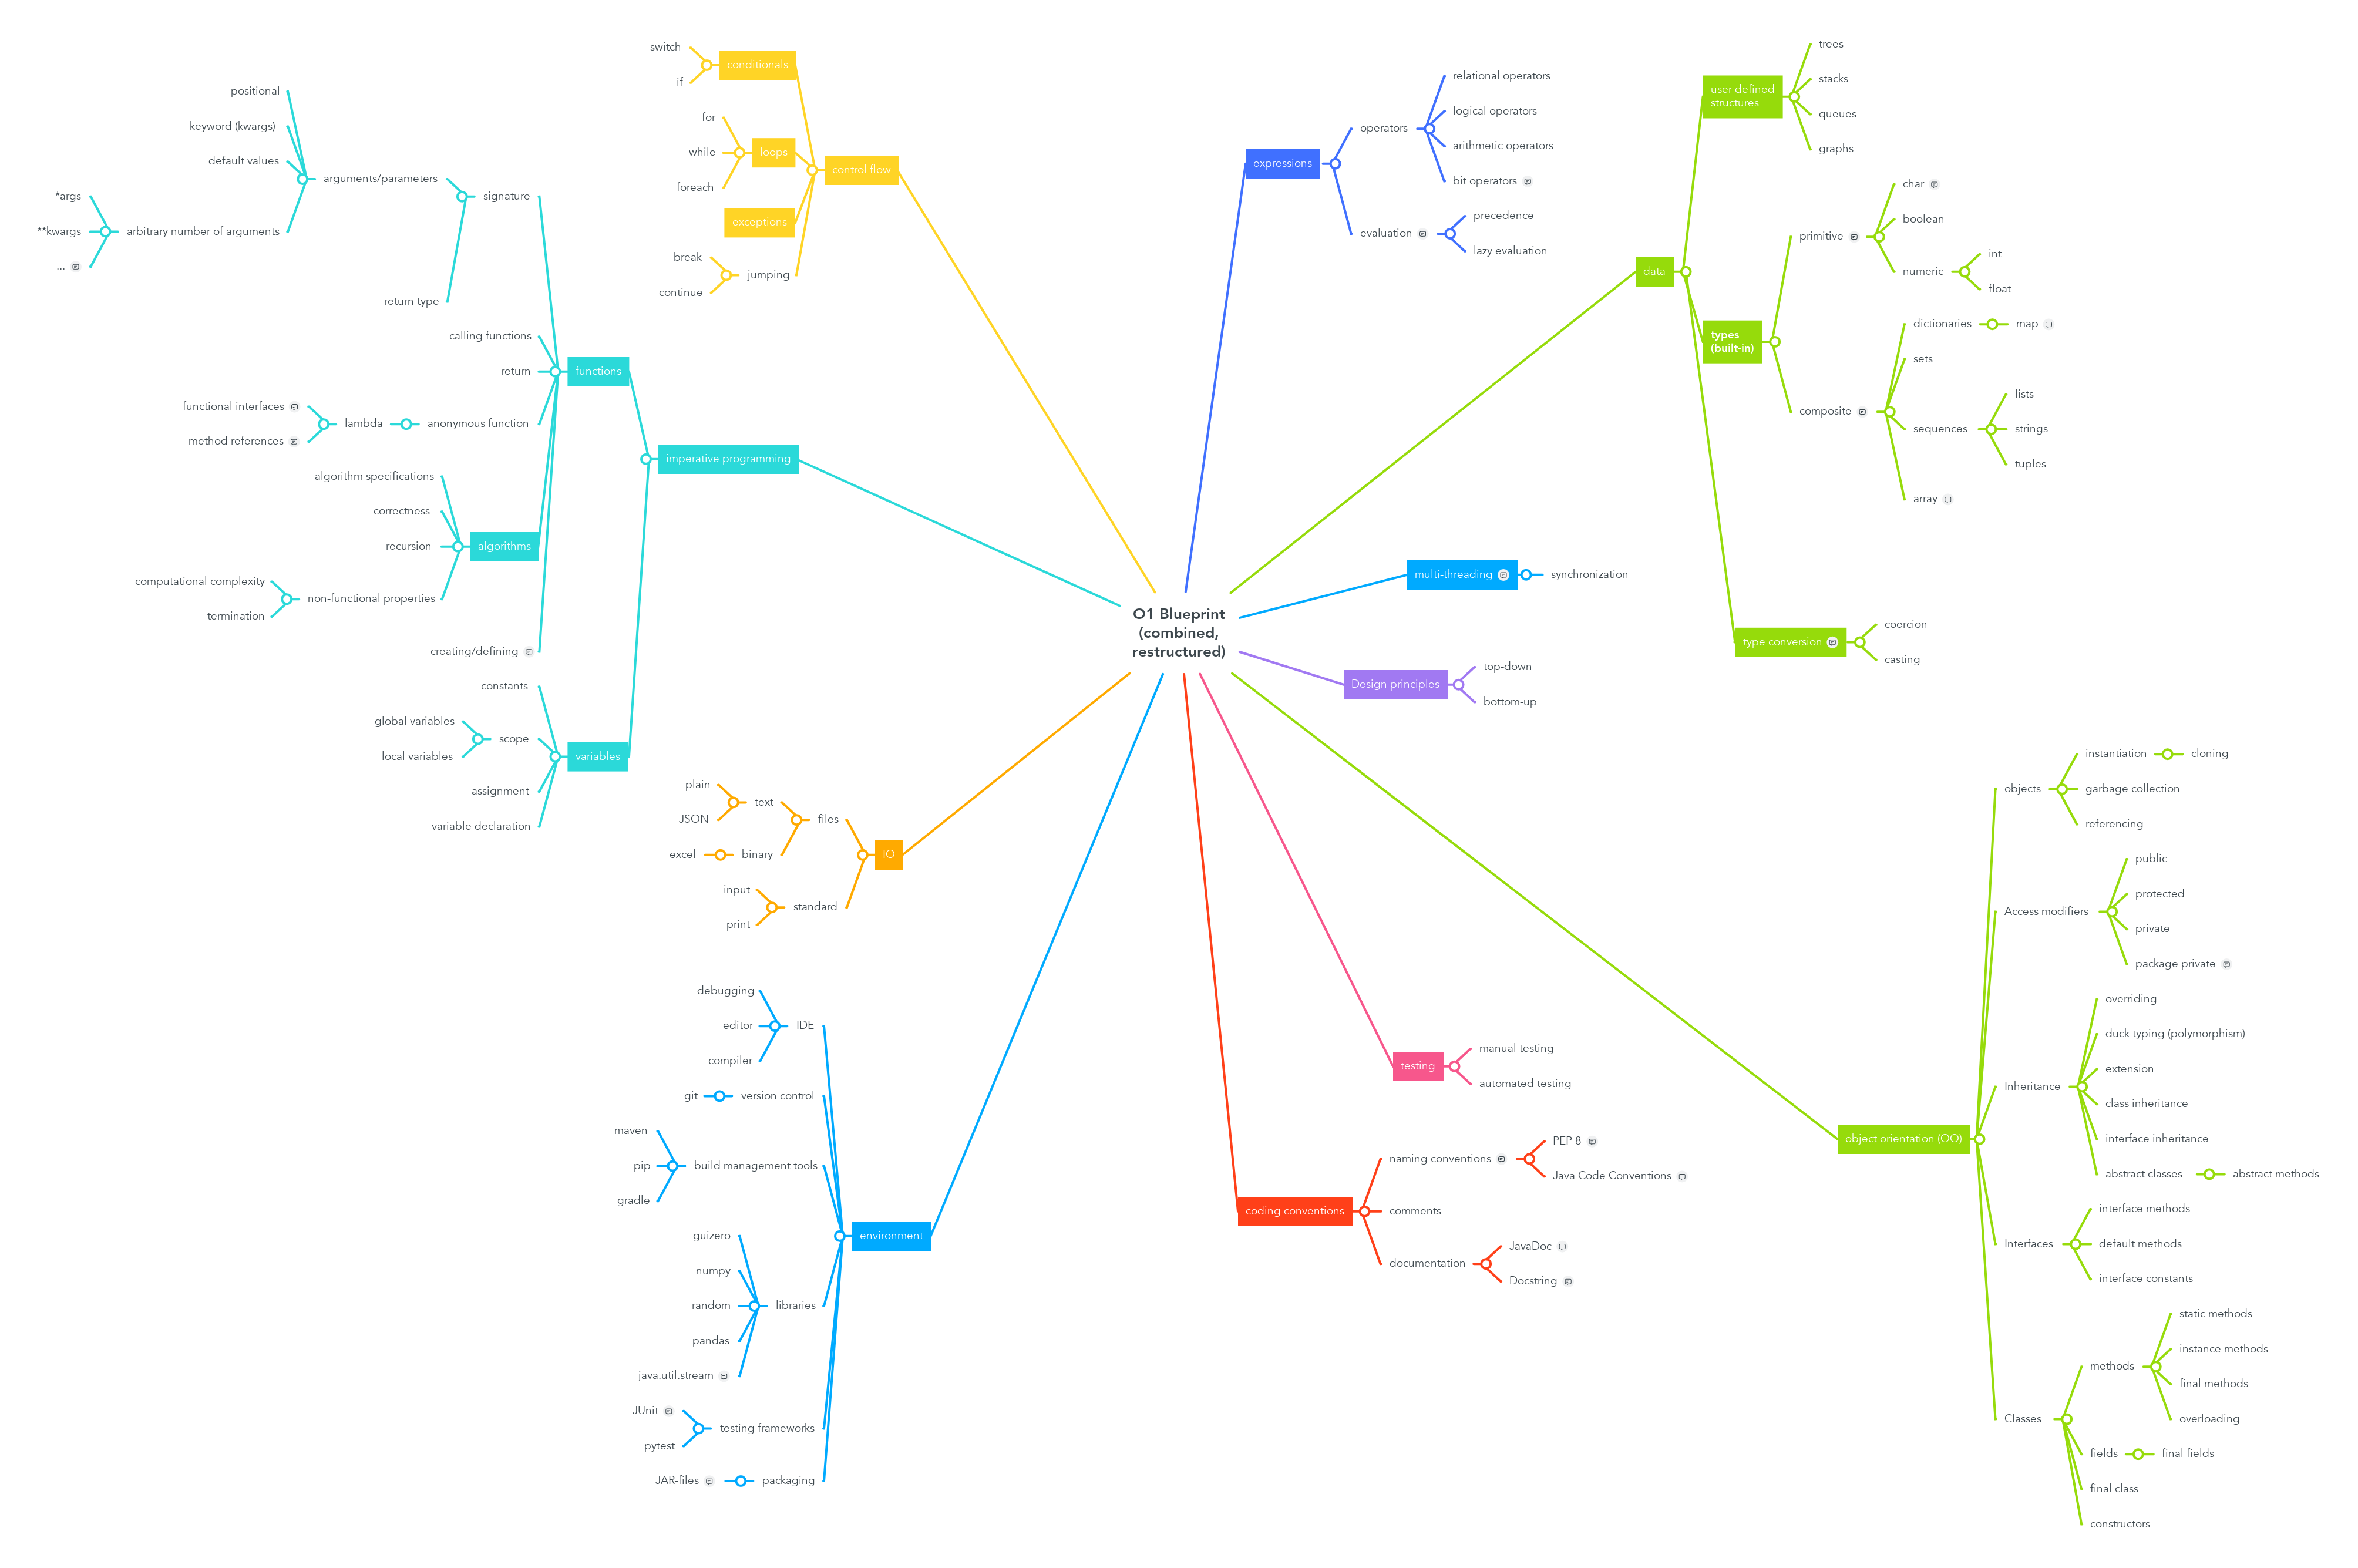 A mindmap of the blueprint describing common concepts in programming languages